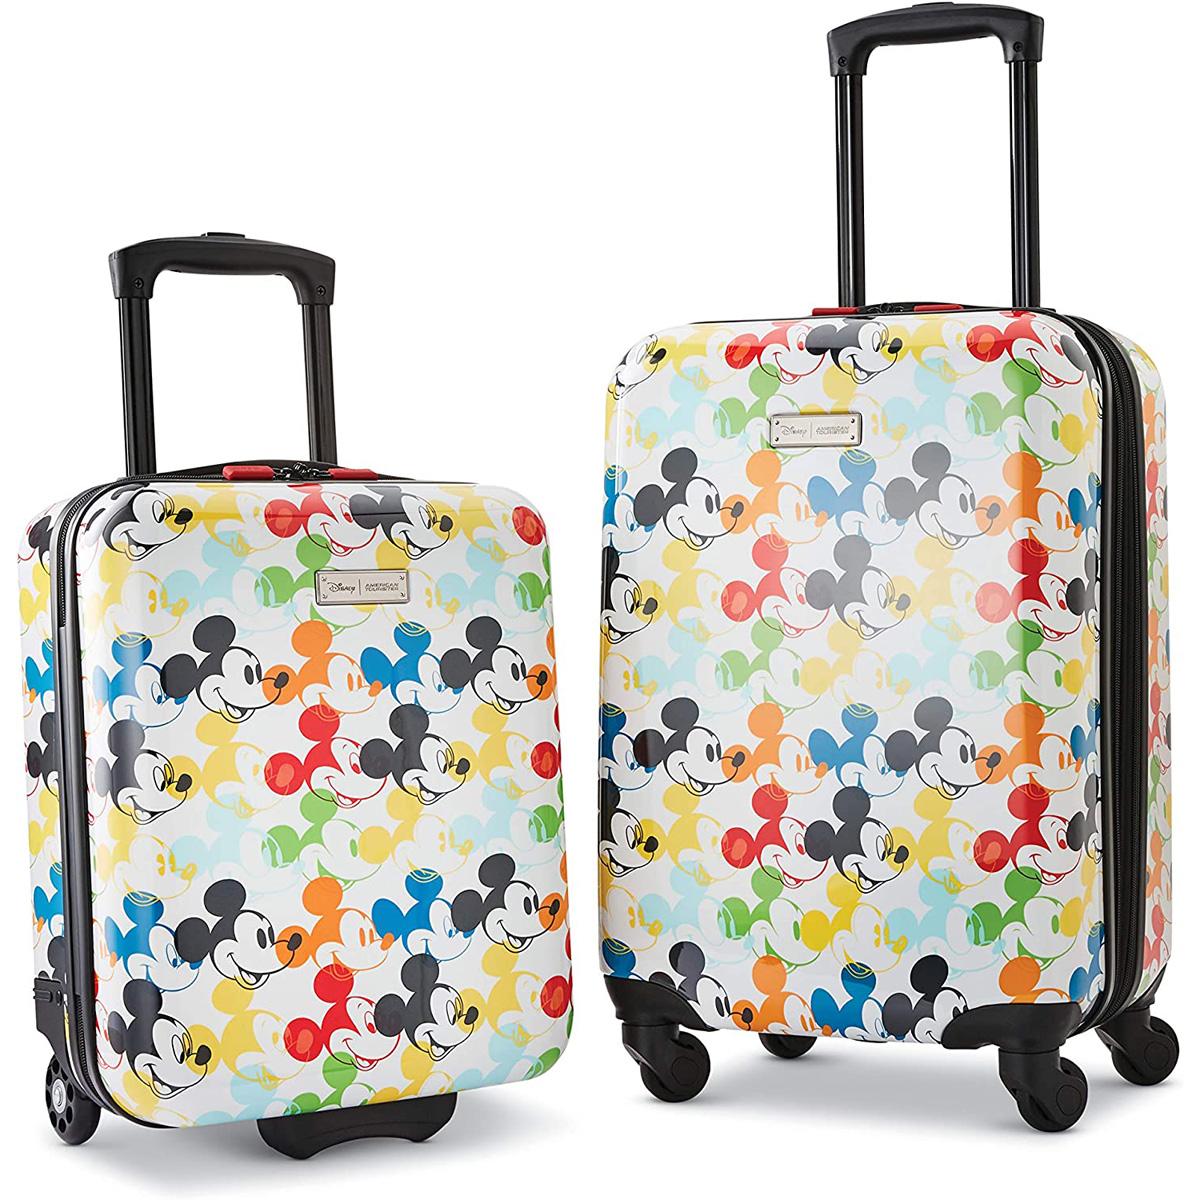 American Tourister Disney Mickey Hardside Luggage 2-Piece Set for $115.50 Shipped